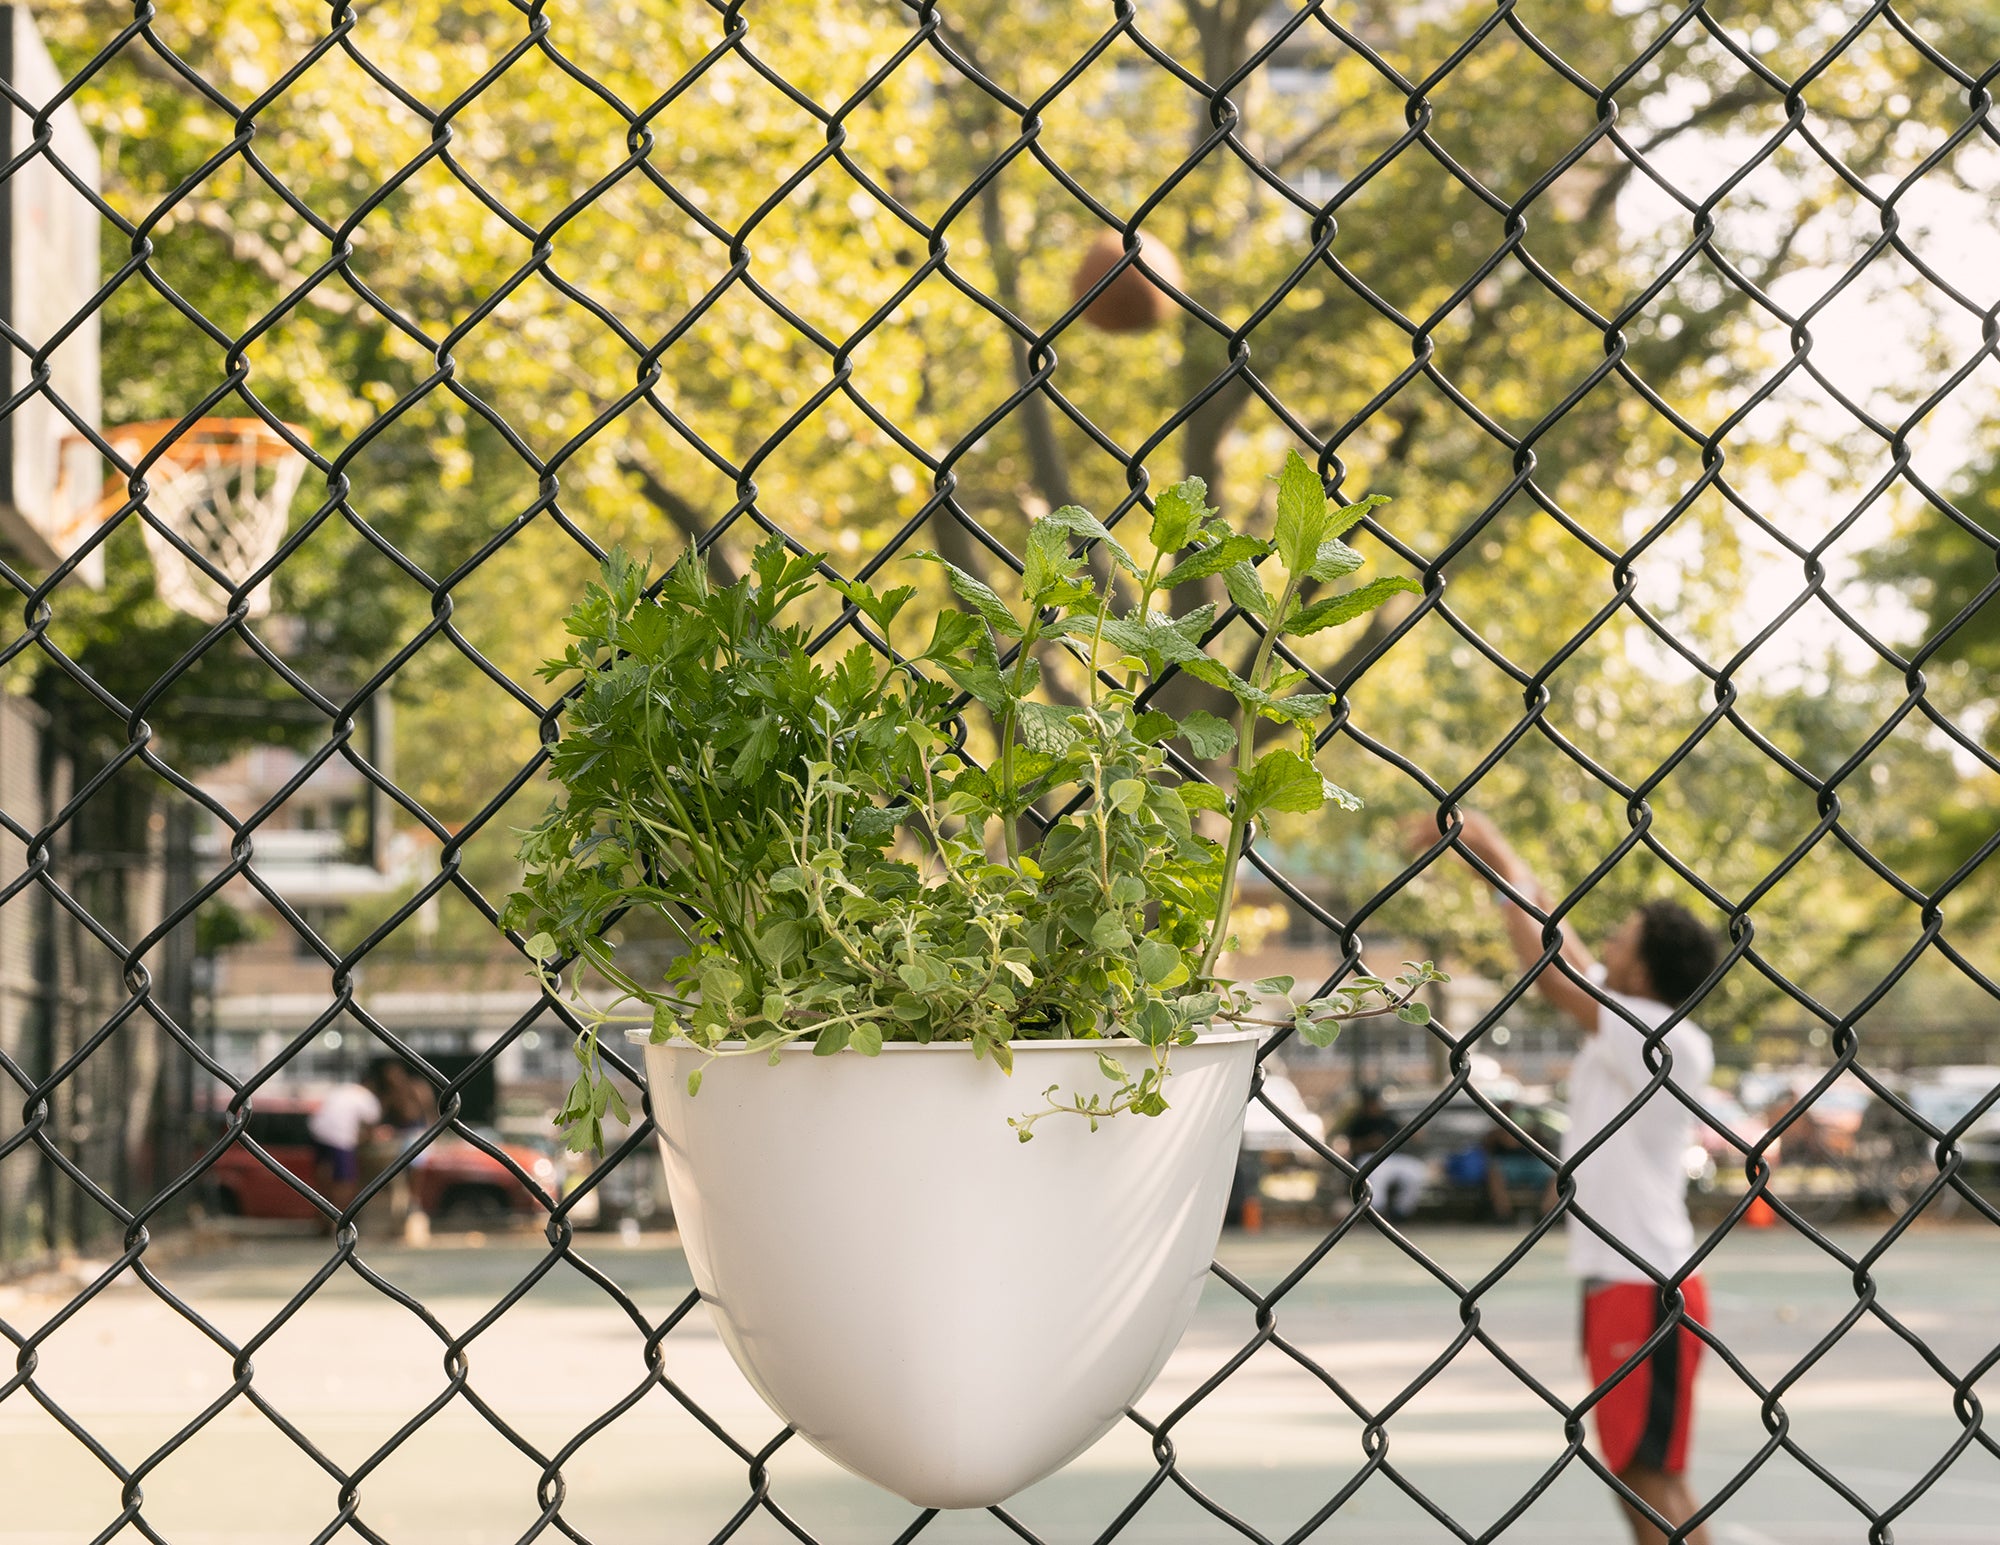 A sead pod vertical garden planter hanging on a chain link fence next to a basketball court